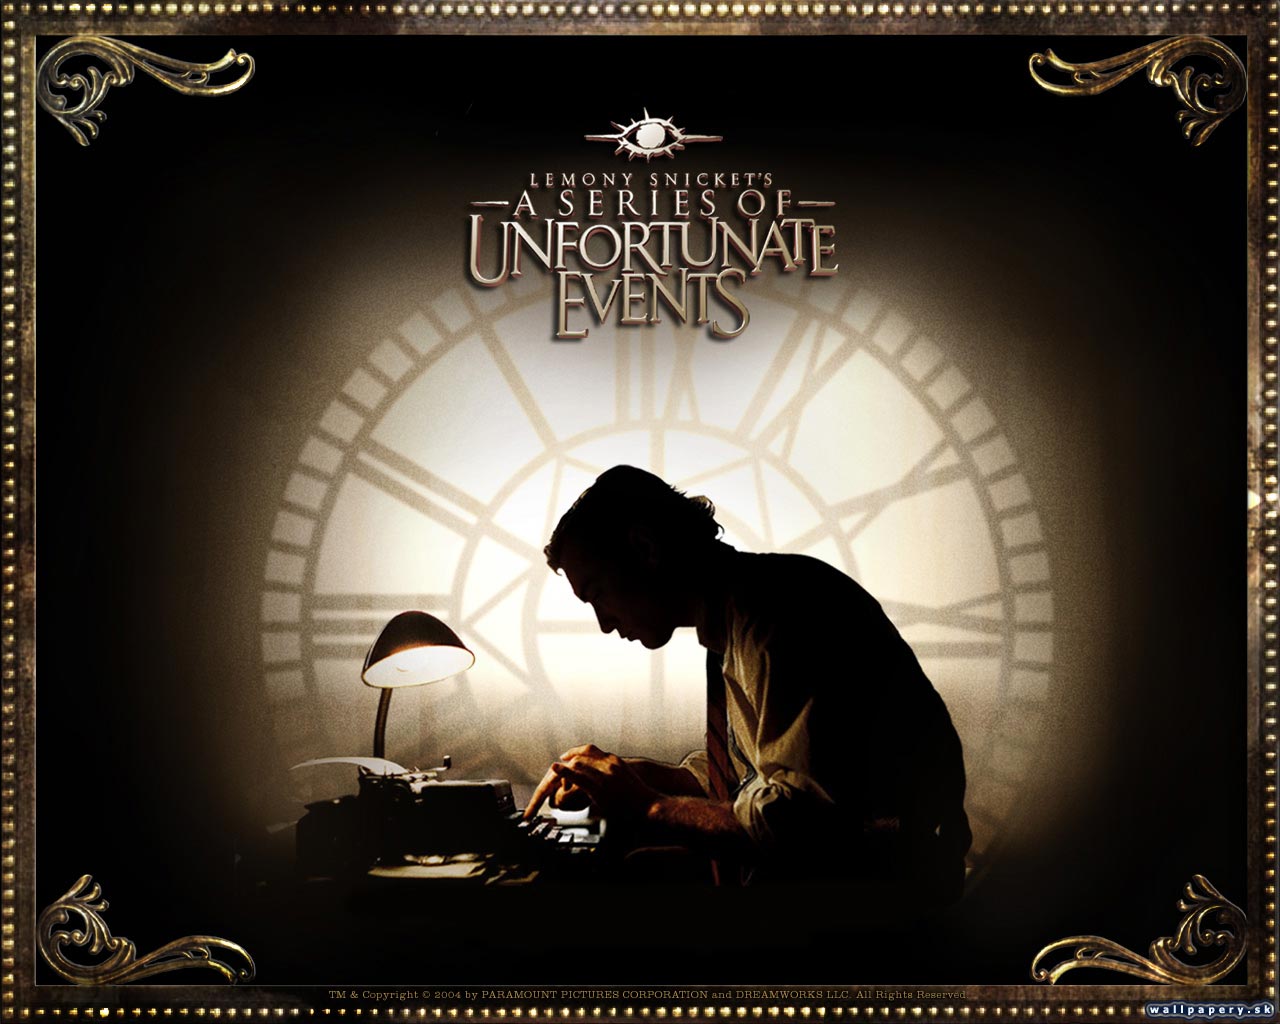 Lemony Snicket's: A Series of Unfortunate Events - wallpaper 1